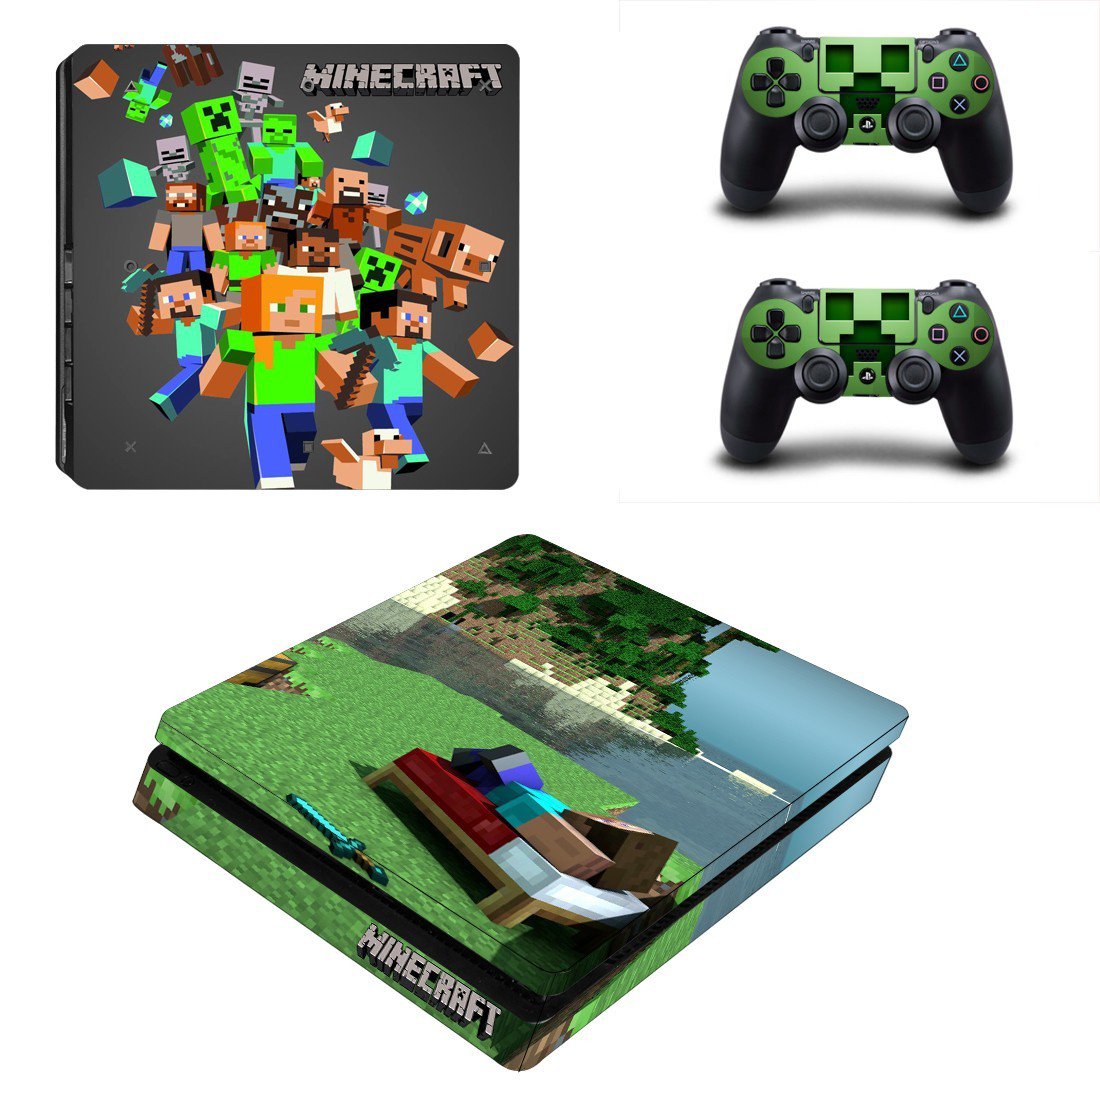 Turkey Handbook Glamor PS4 Slim And Controllers Skin Cover Minecraft - ConsoleSkins.co